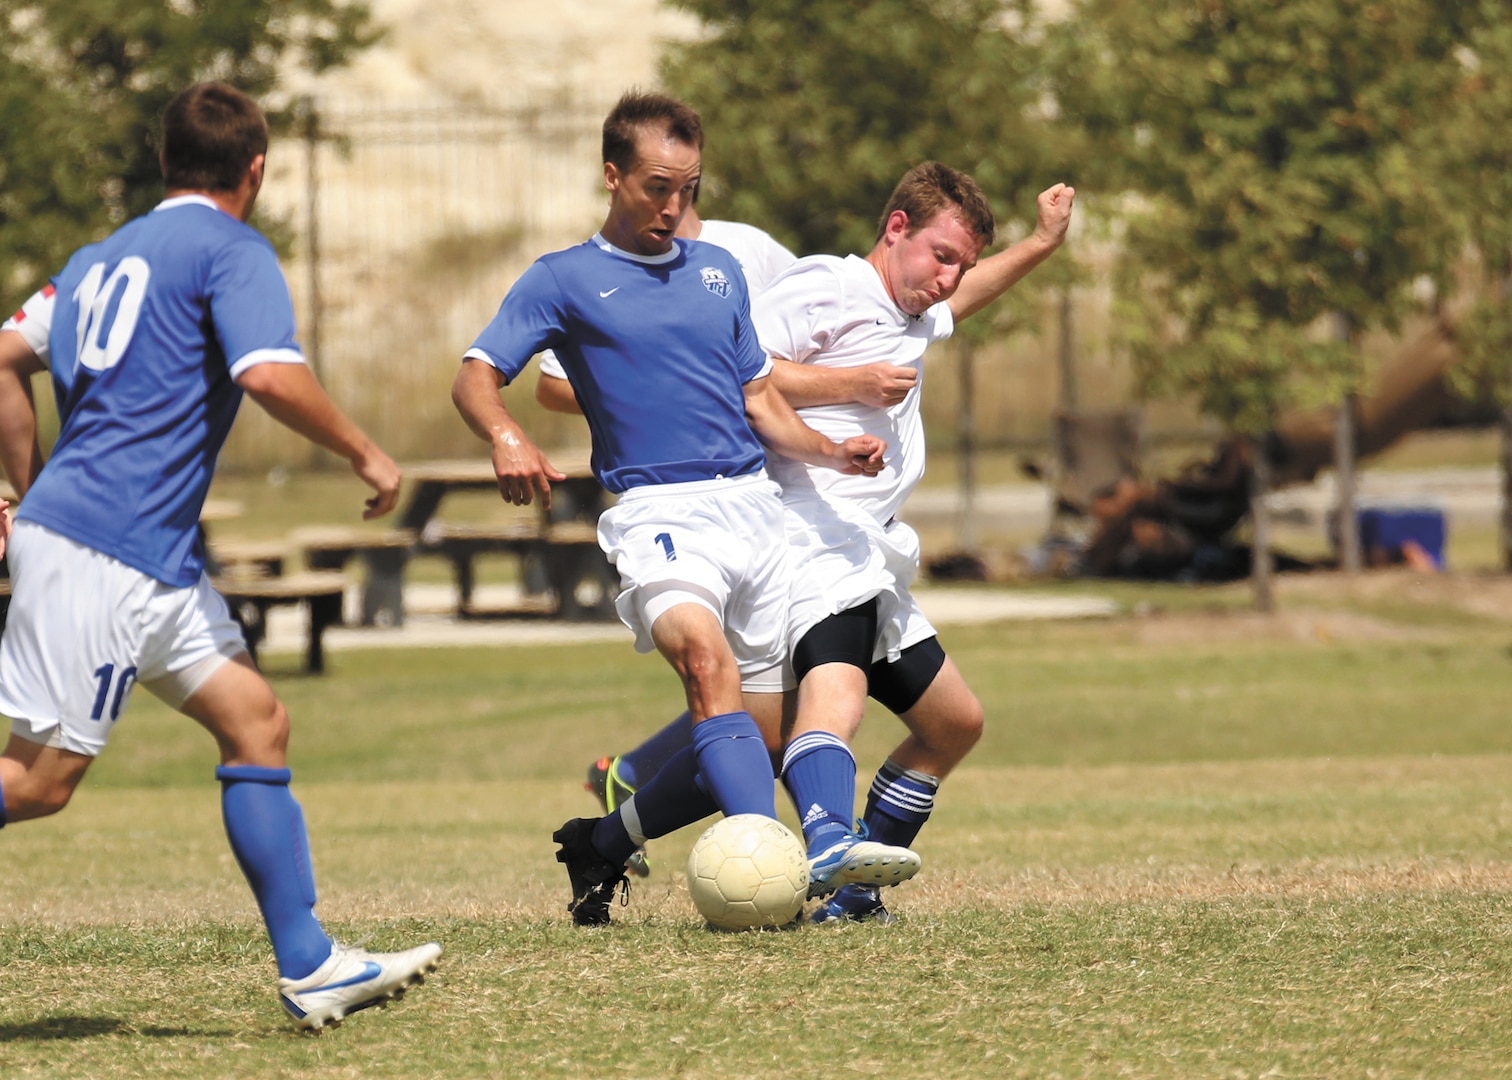 Sam Page (middle) of Joint Base San Antonio-Randolph soccer team competes against the Columbus Air Force Base soccer team during the Defender Cup tournament, Sept. 2. (U.S. Air Force photo/Robbin Cresswell)